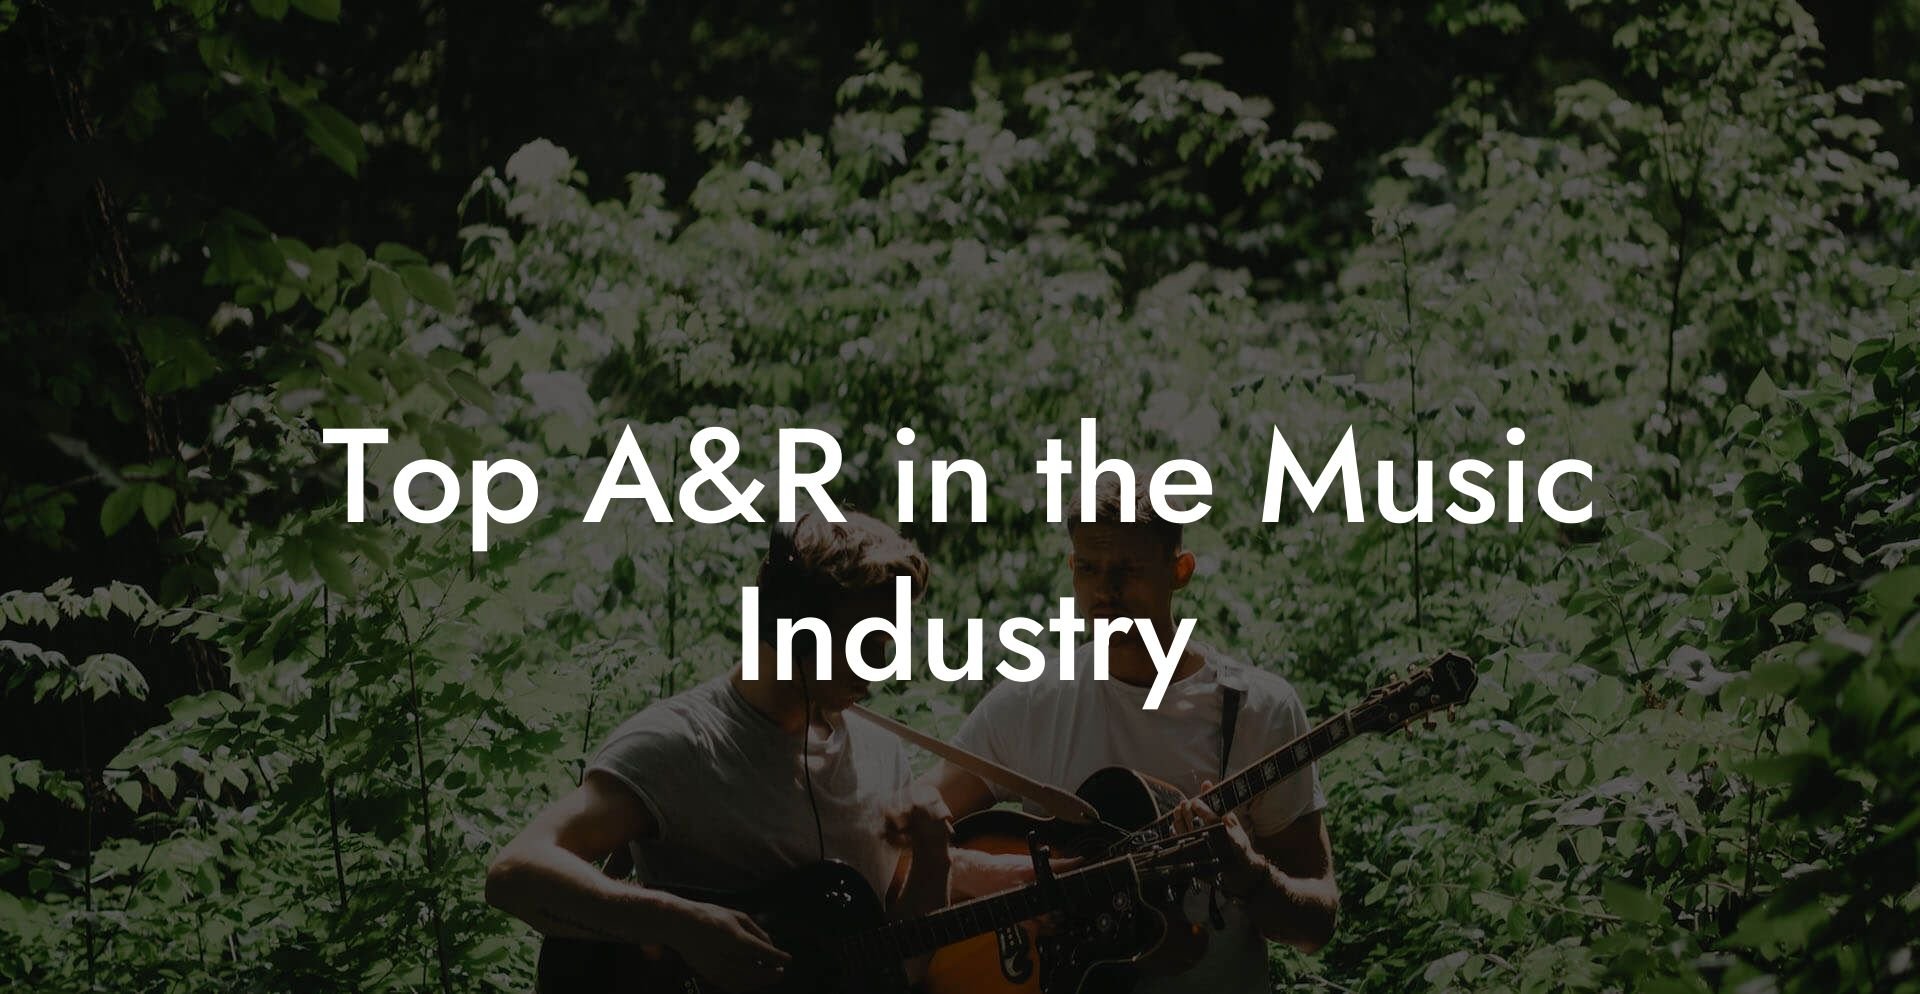 Top A&R in the Music Industry